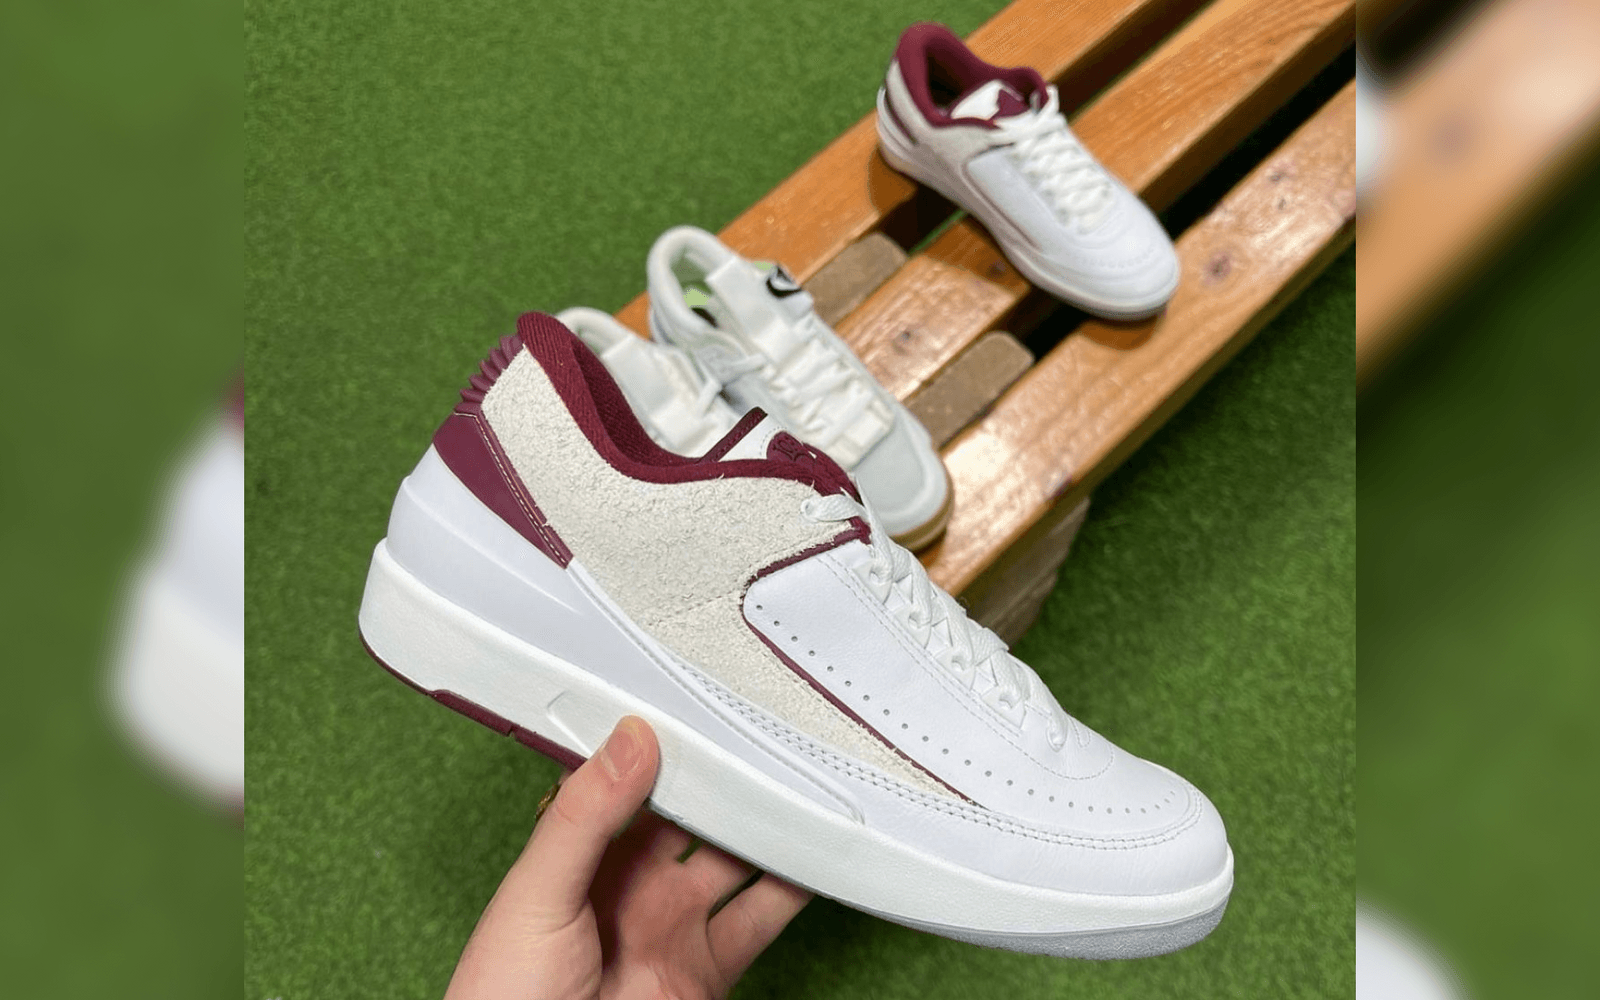 First Look of The New Air Jordan 2 Low Cherrywood TheSiteSupply